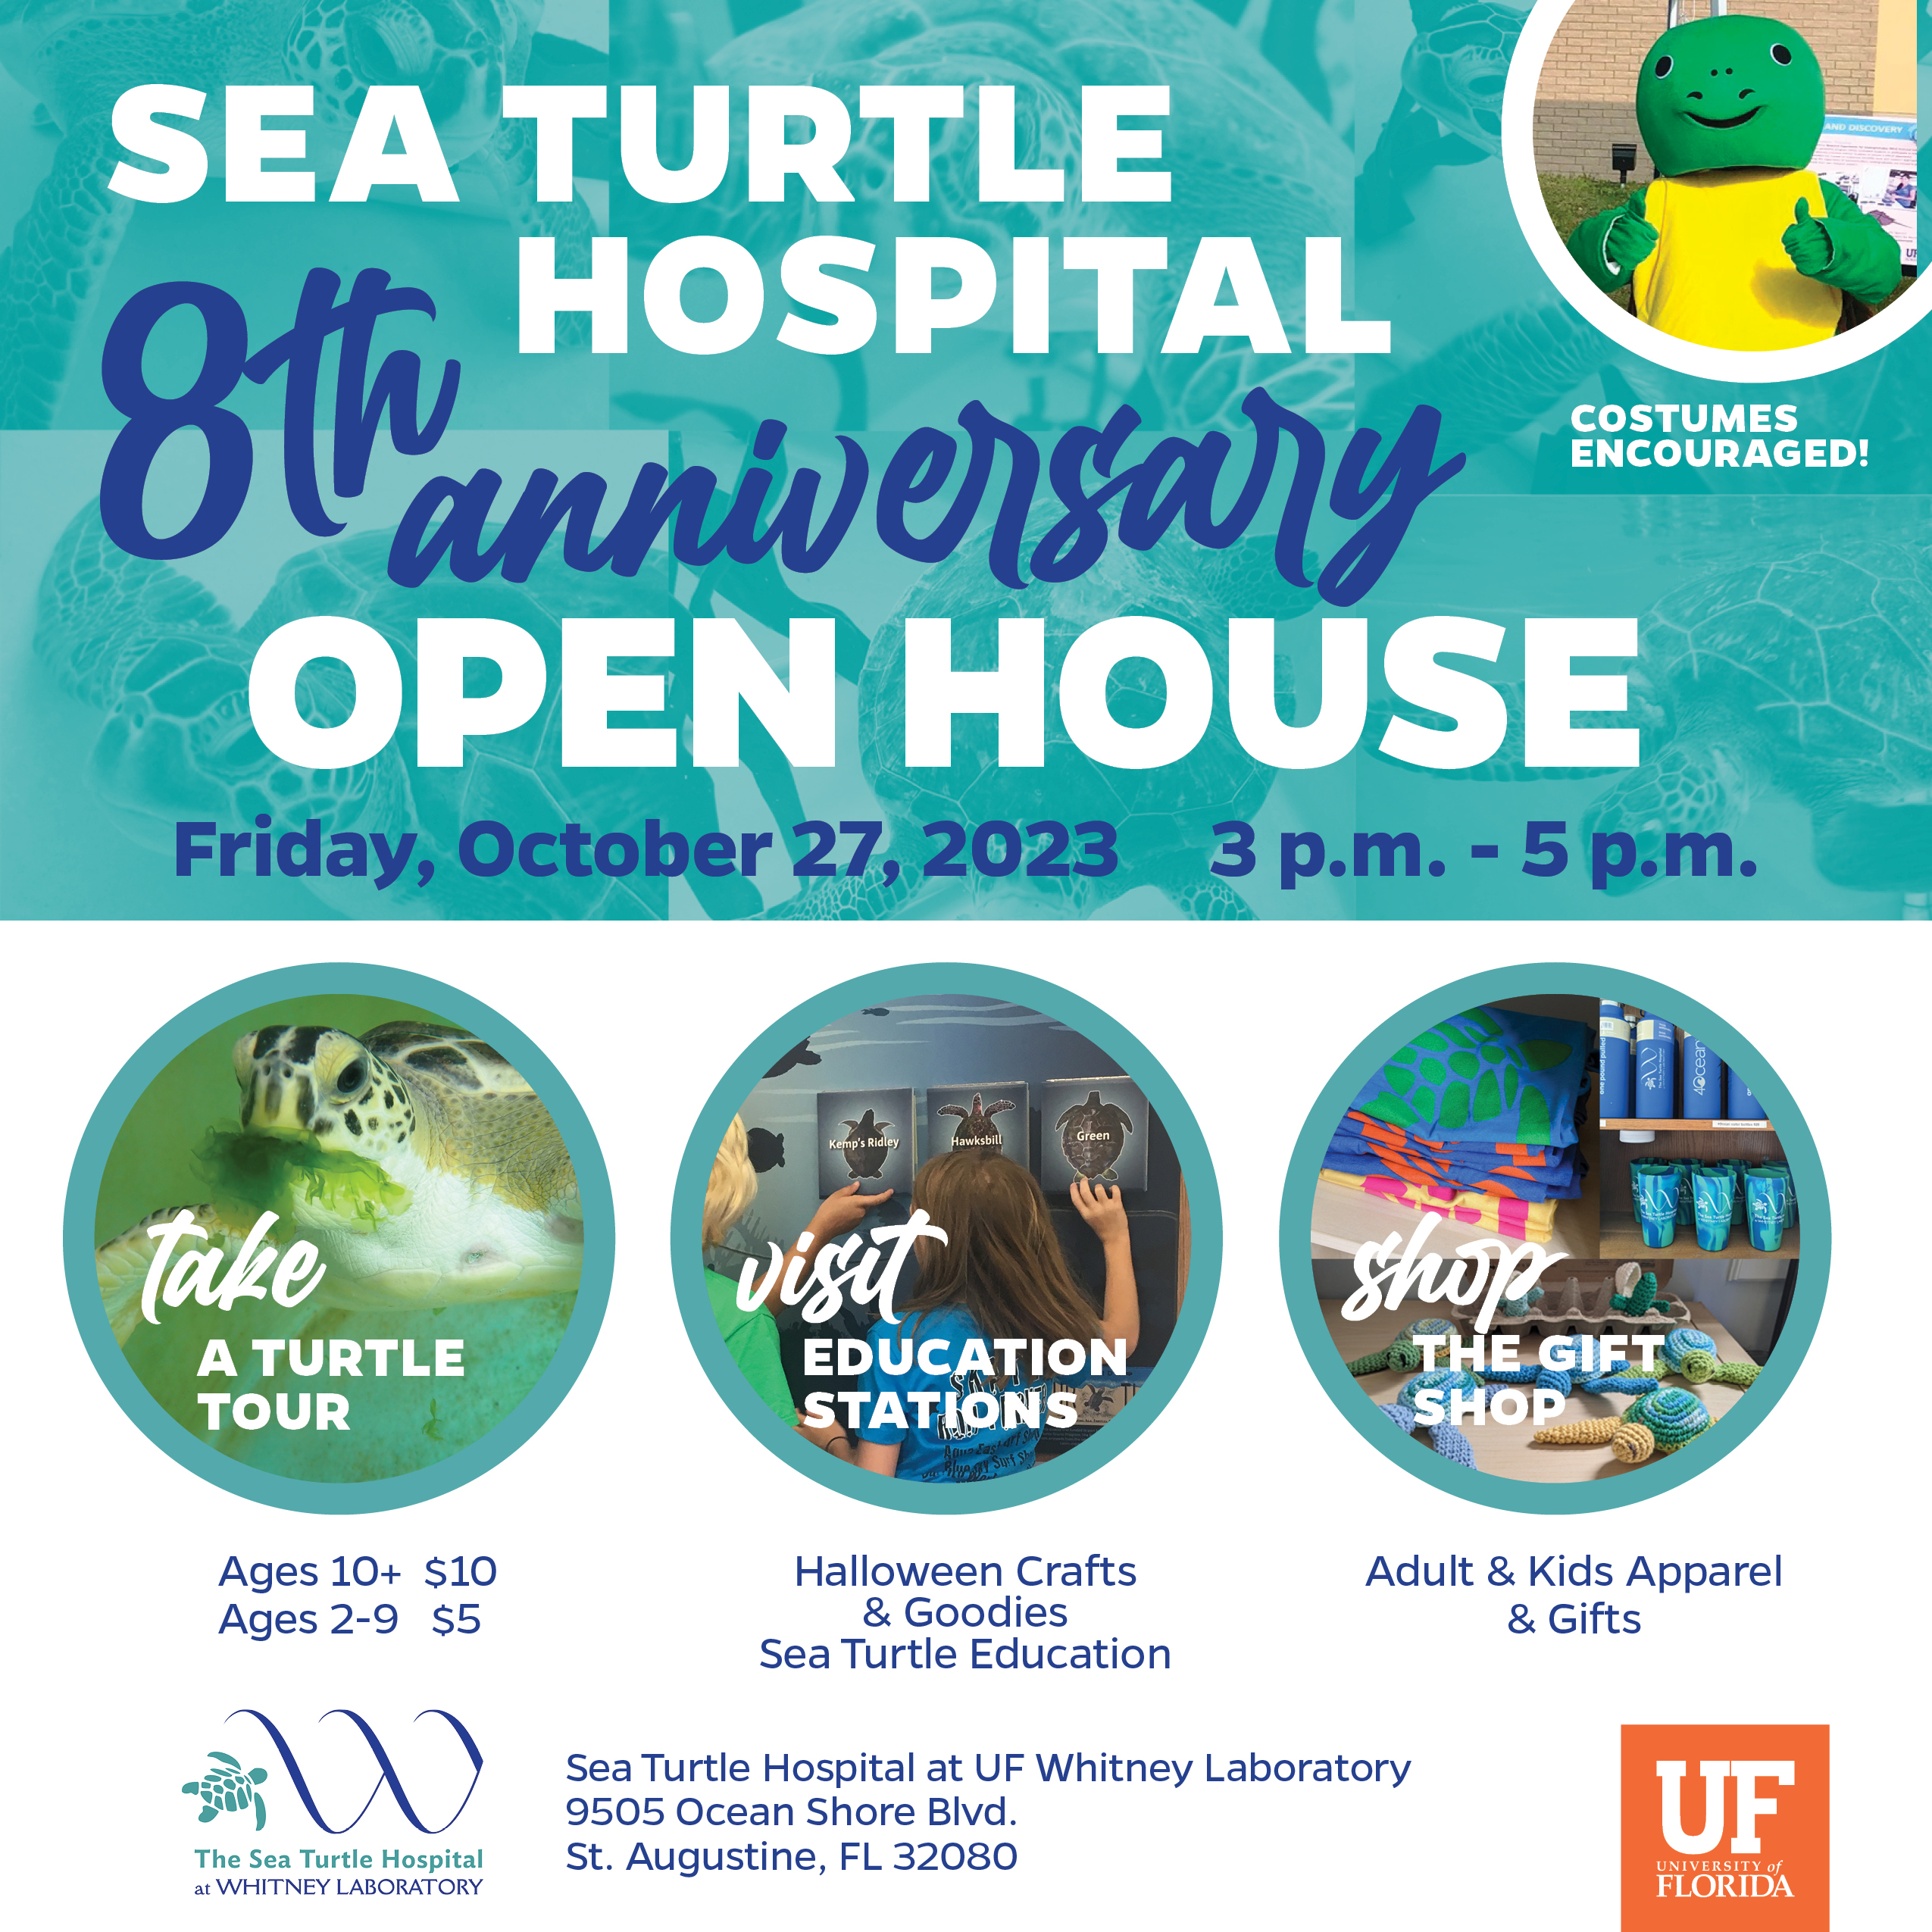 Join us October 27 to Celebrate the Sea Turtle Hospital's 8th Anniversary!